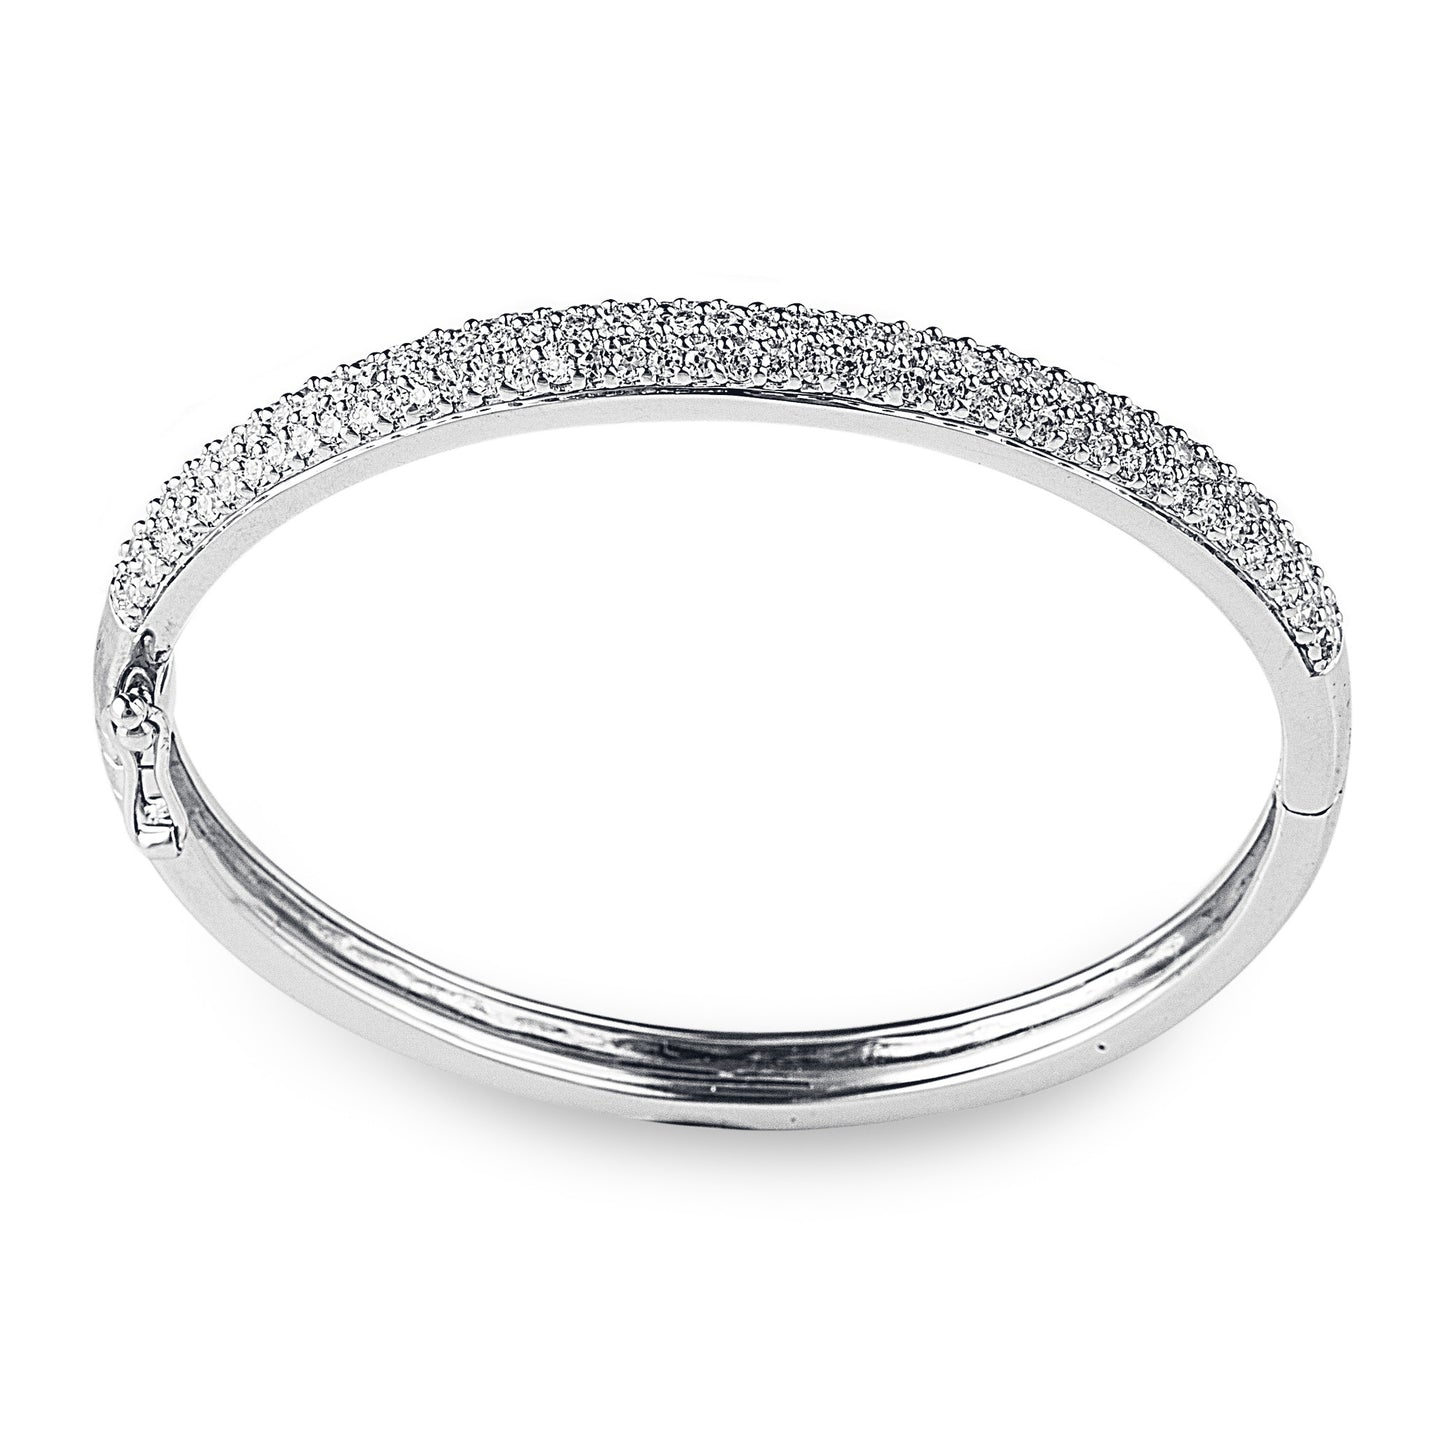 Endless Love Bangle in 925 sterling silver with pave set cubic zirconia stones. Worldwide shipping from Australia. Affordable luxury jewellery.